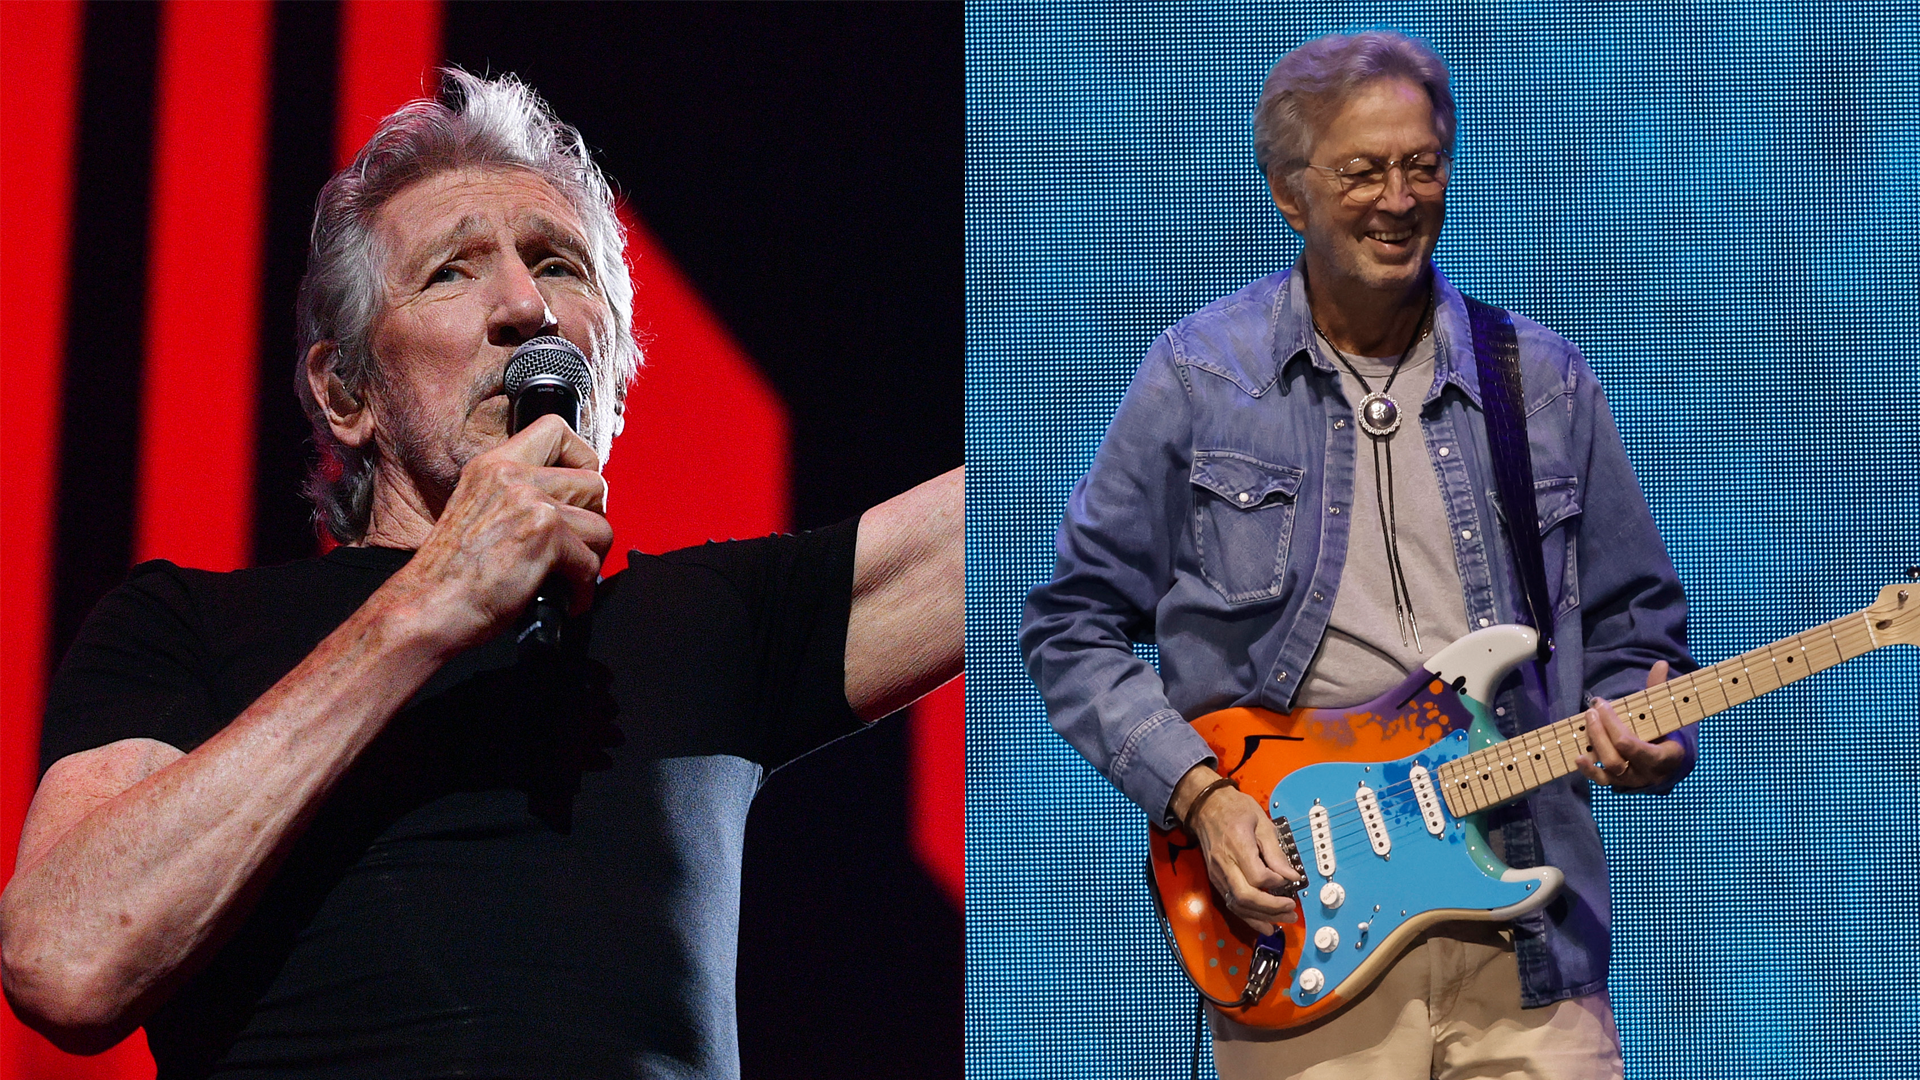 Eric Clapton says Pink Floyd's Roger Waters suffers "terribly" from sharing his political views